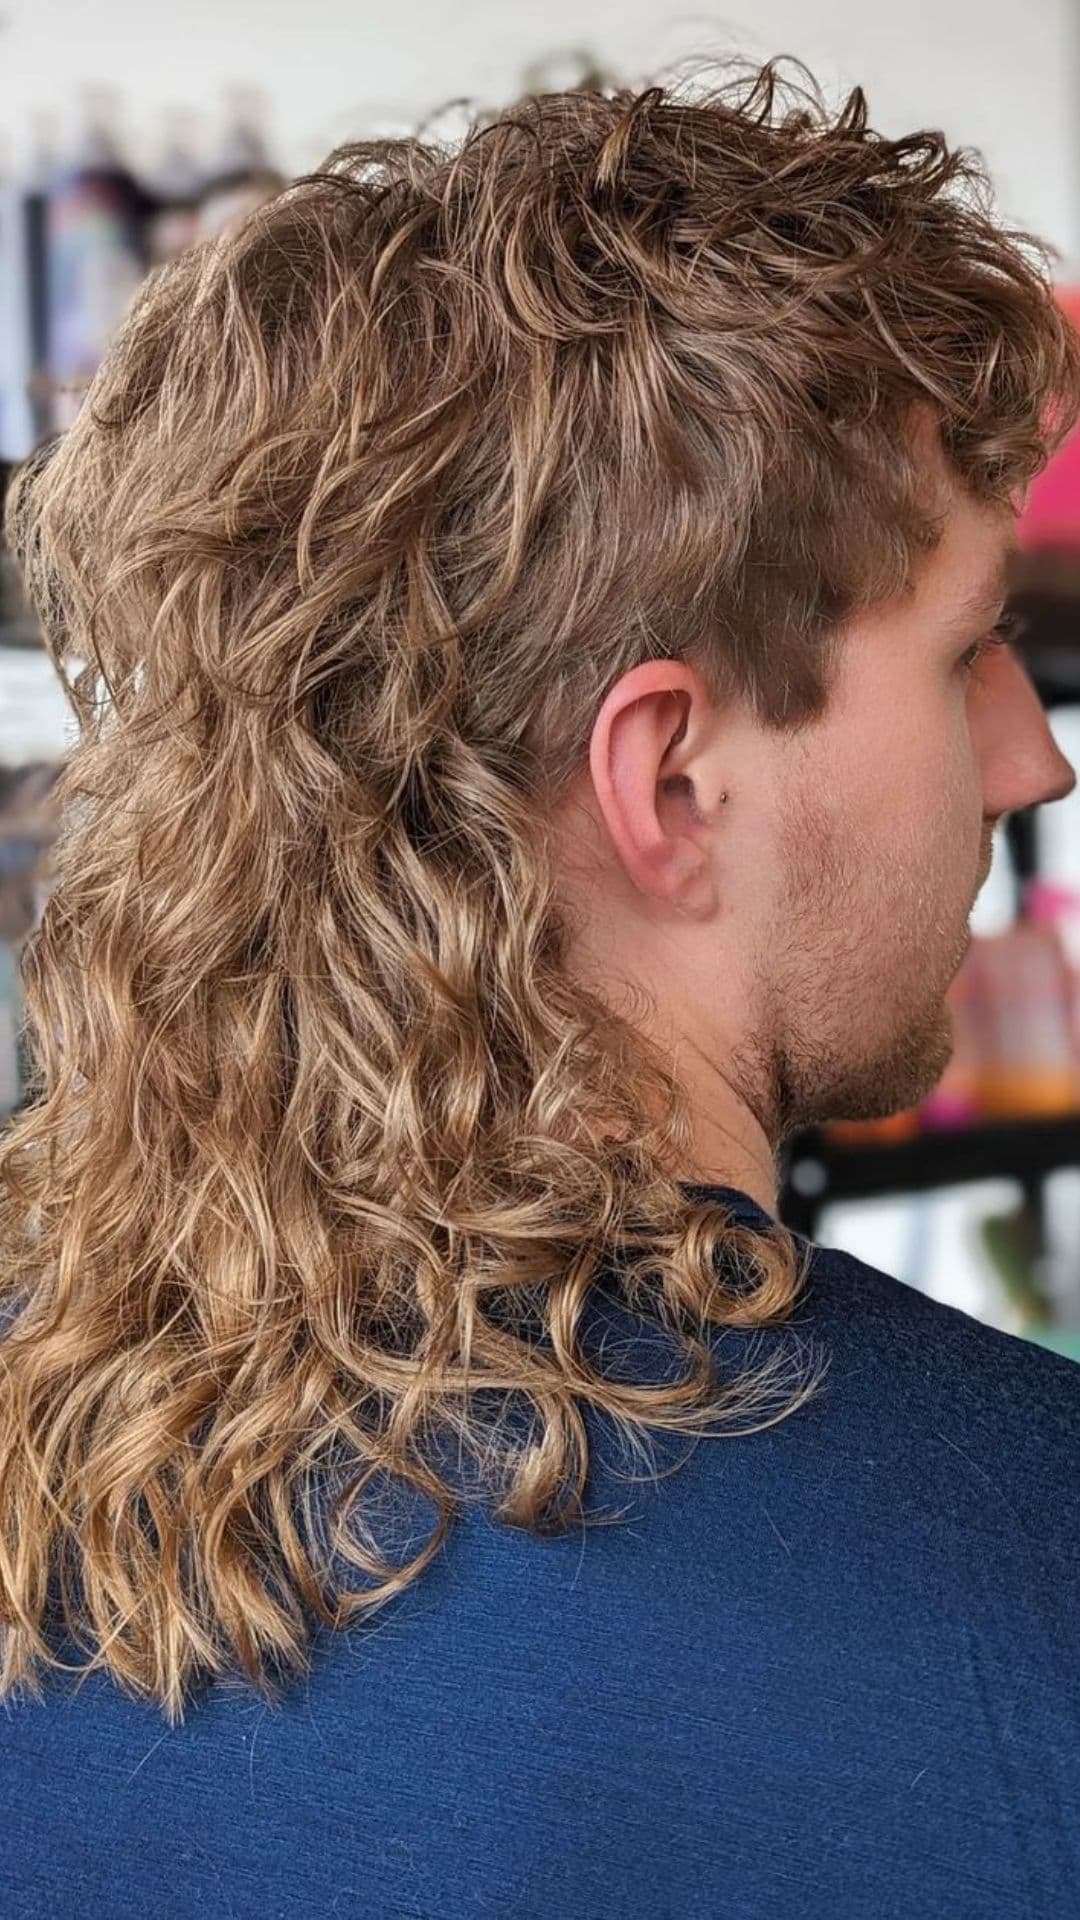 A man with a long curly mullet.